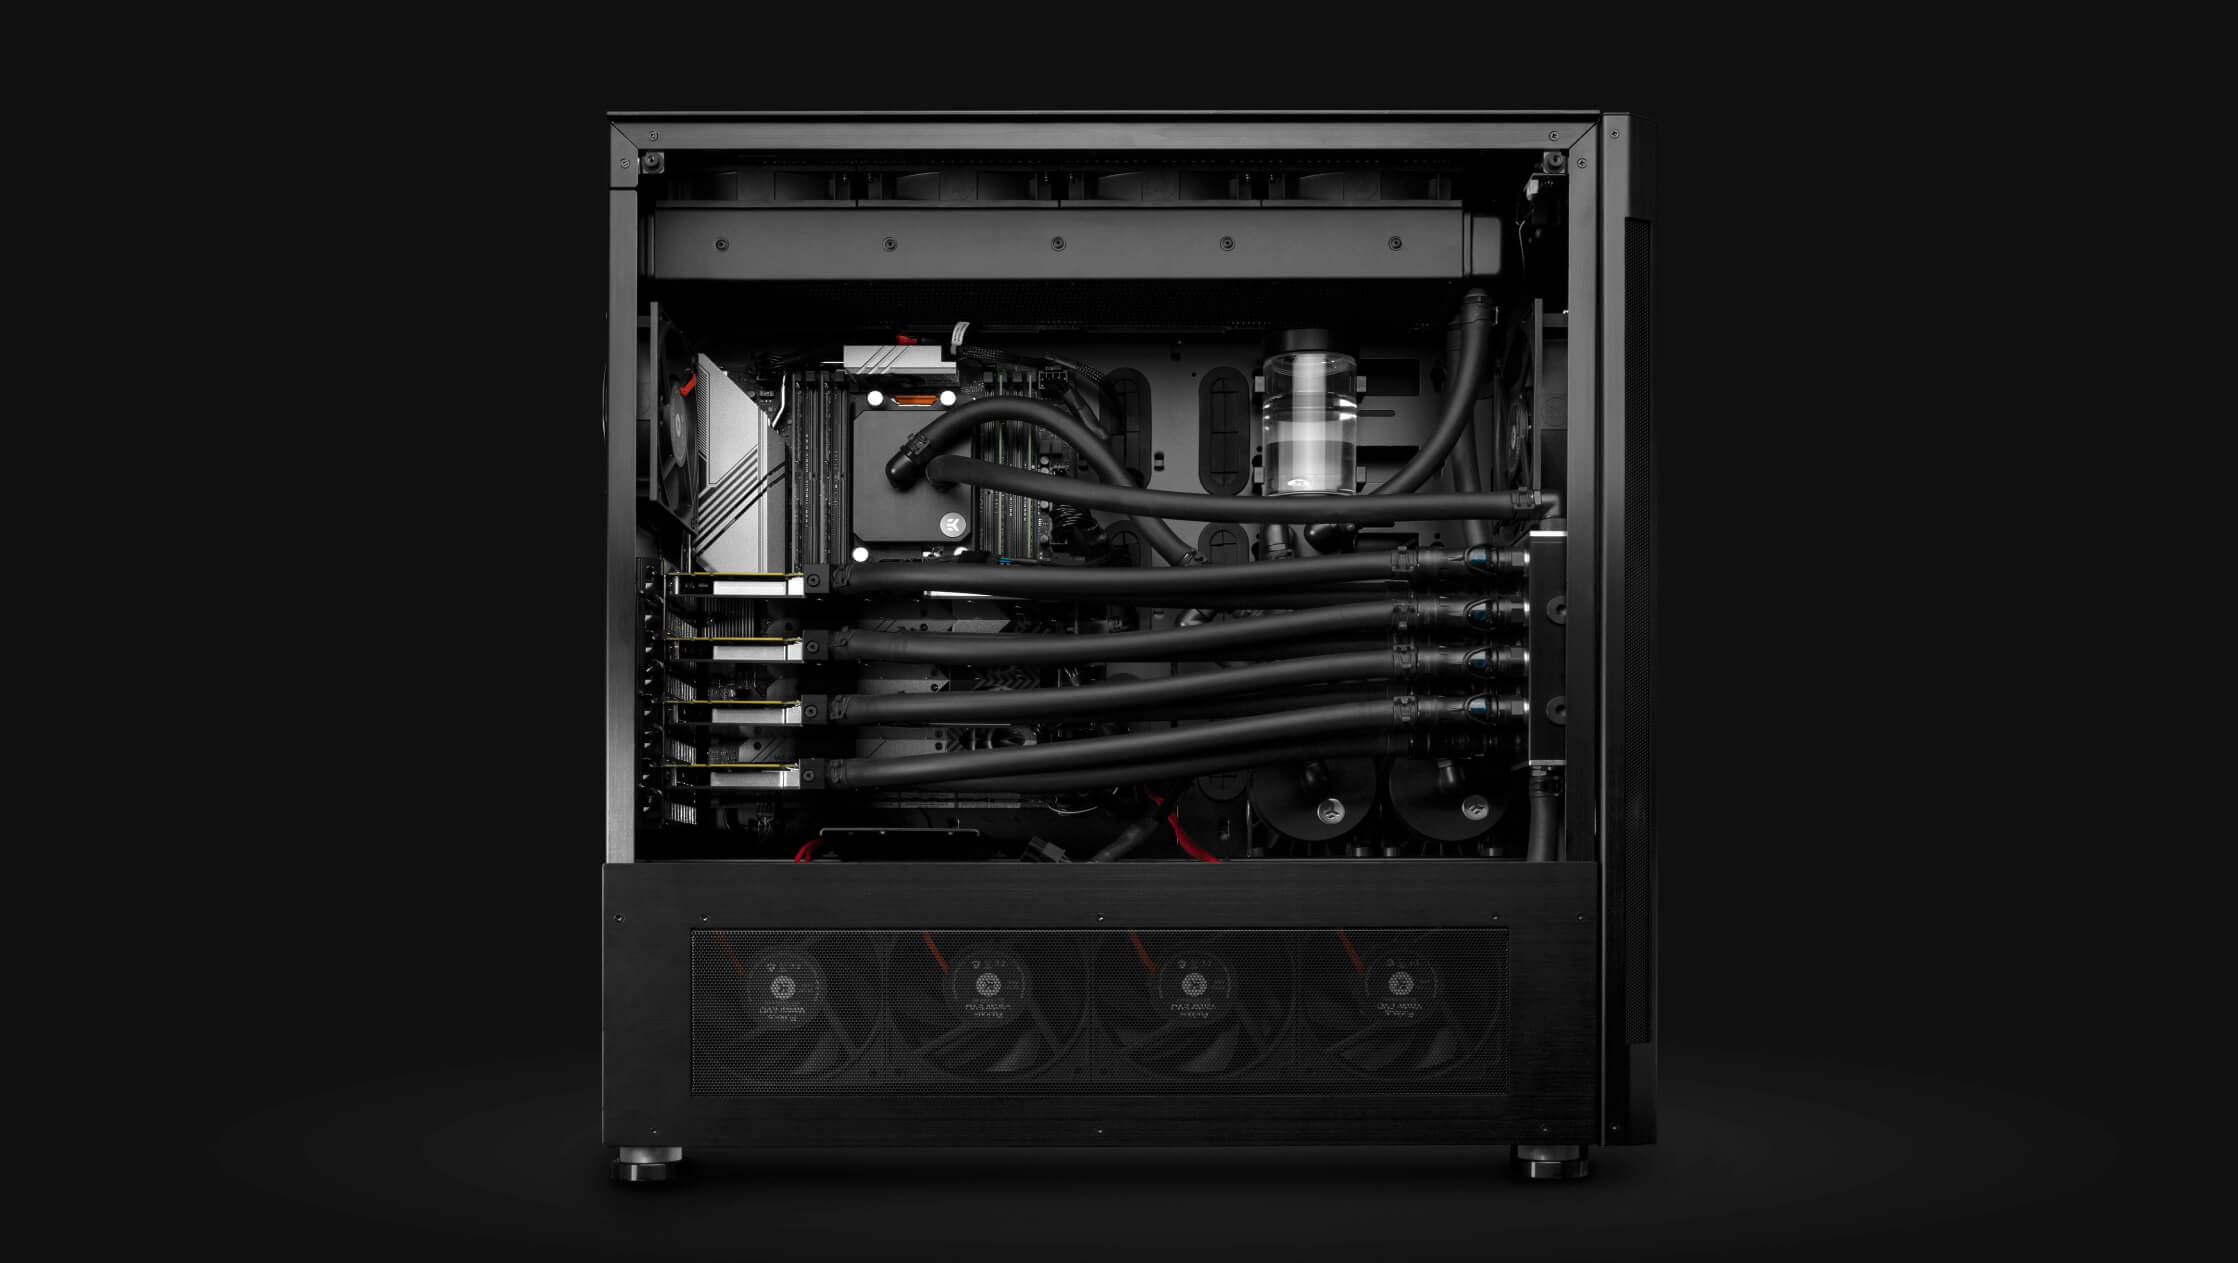 EK-Fluid Works Studio Series S5000 workstation with 4 GPUs and high-performance CPU – well beyond V-Ray hardware requirements